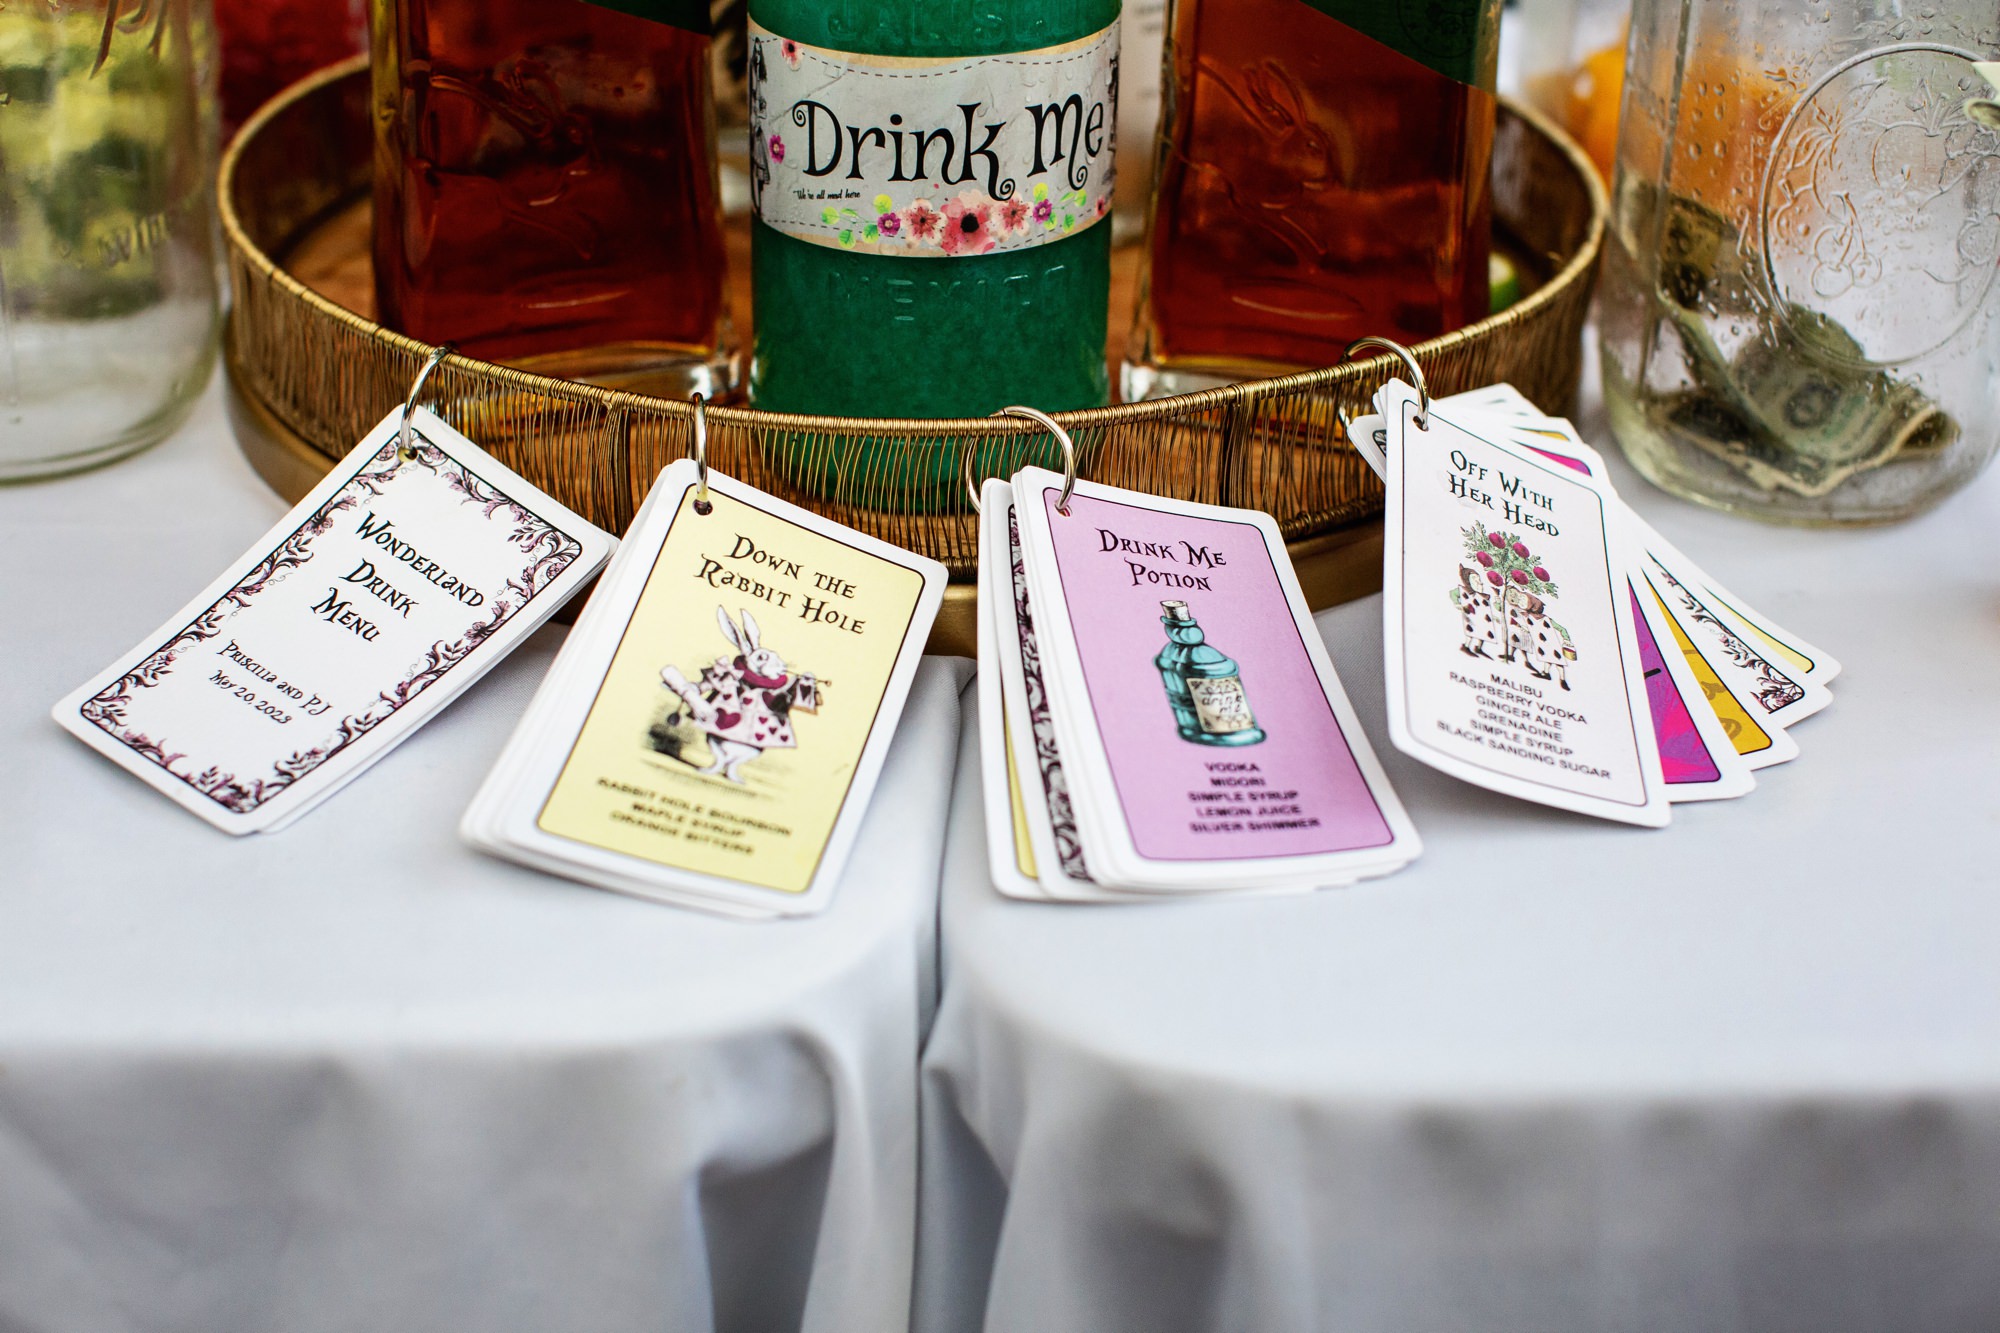 An Alice in Wonderland themed wedding at The Gables.